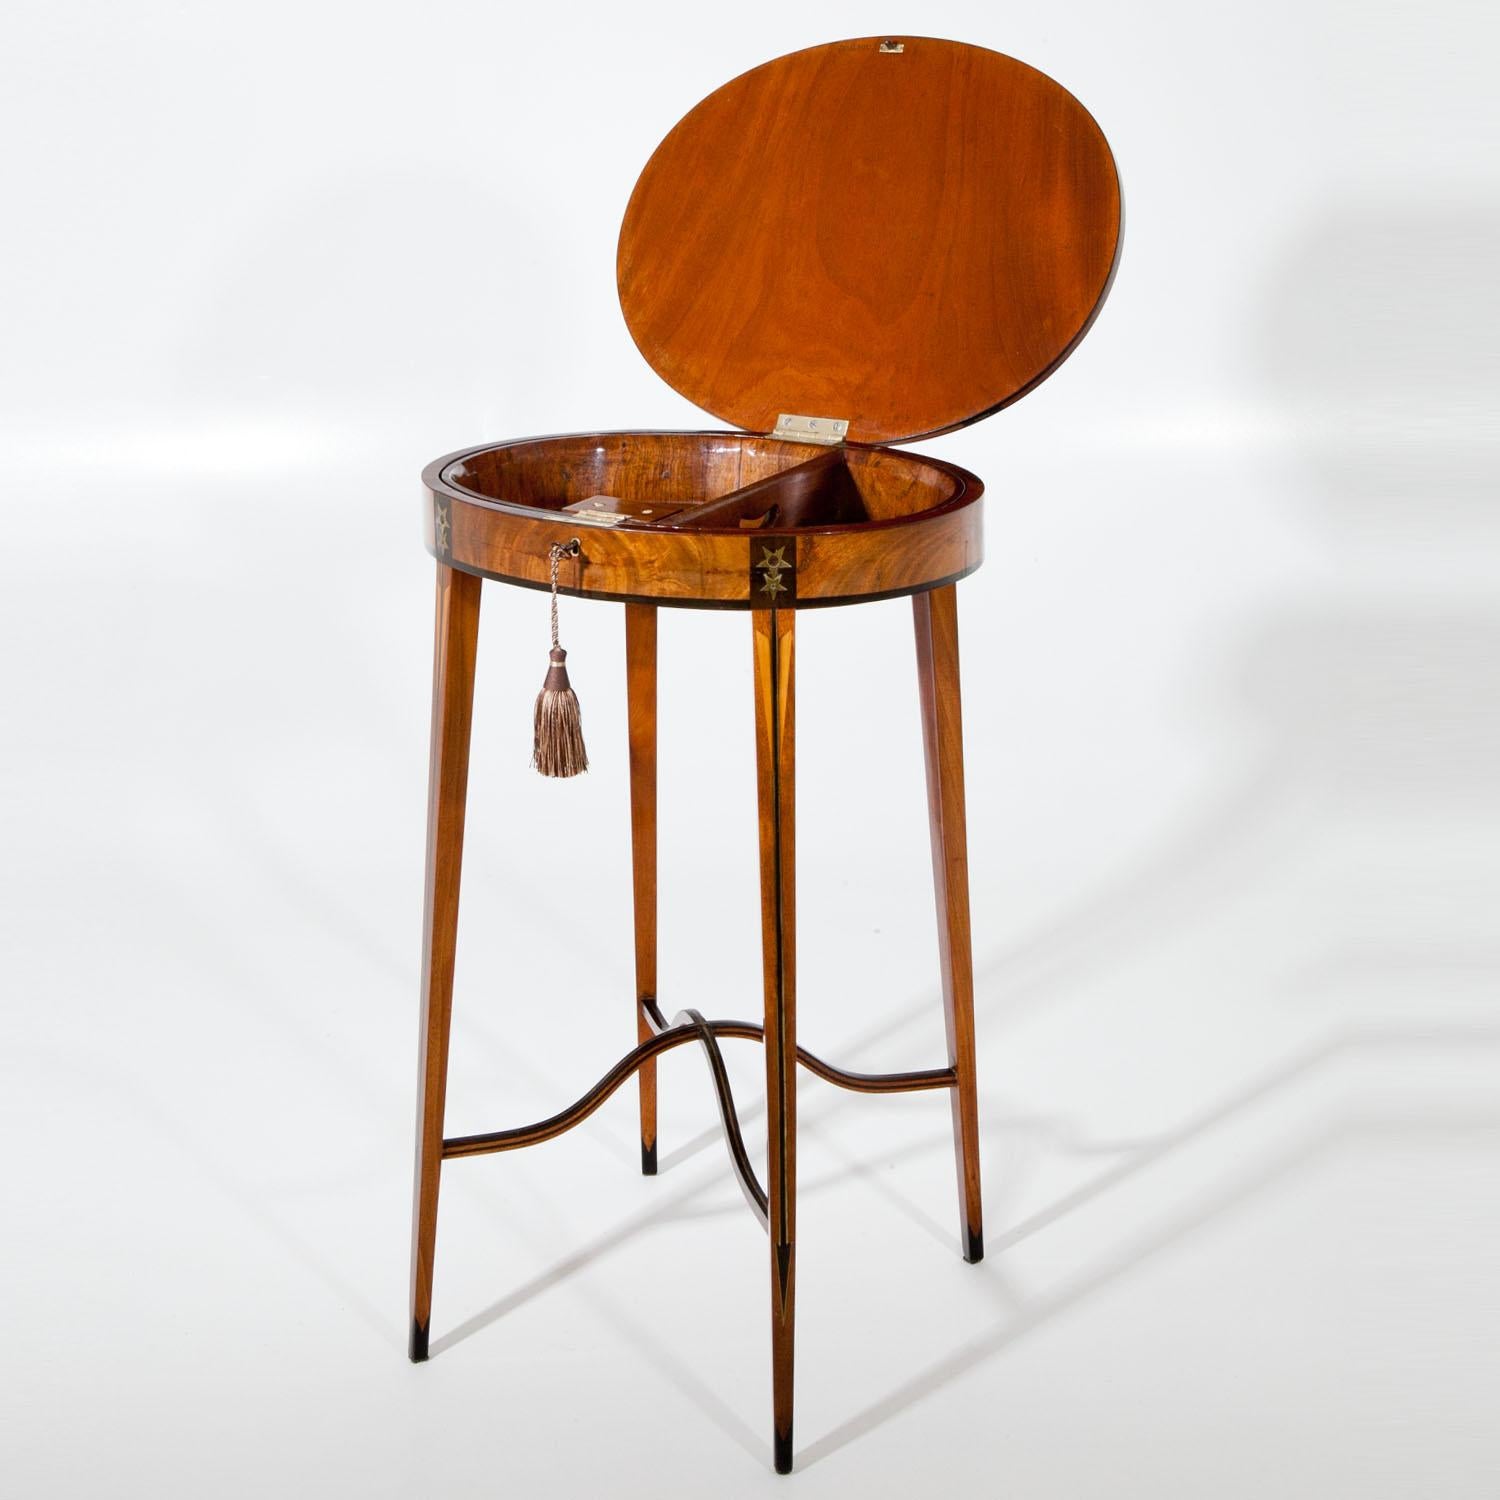 Small side table, standing on long slender tapered legs with crossed and curved strutting in between. The oval body is decorated with star-shaped inlays, the legs show arrows. The interior holds a removable tray and the lid is stamped CHAPUIS.